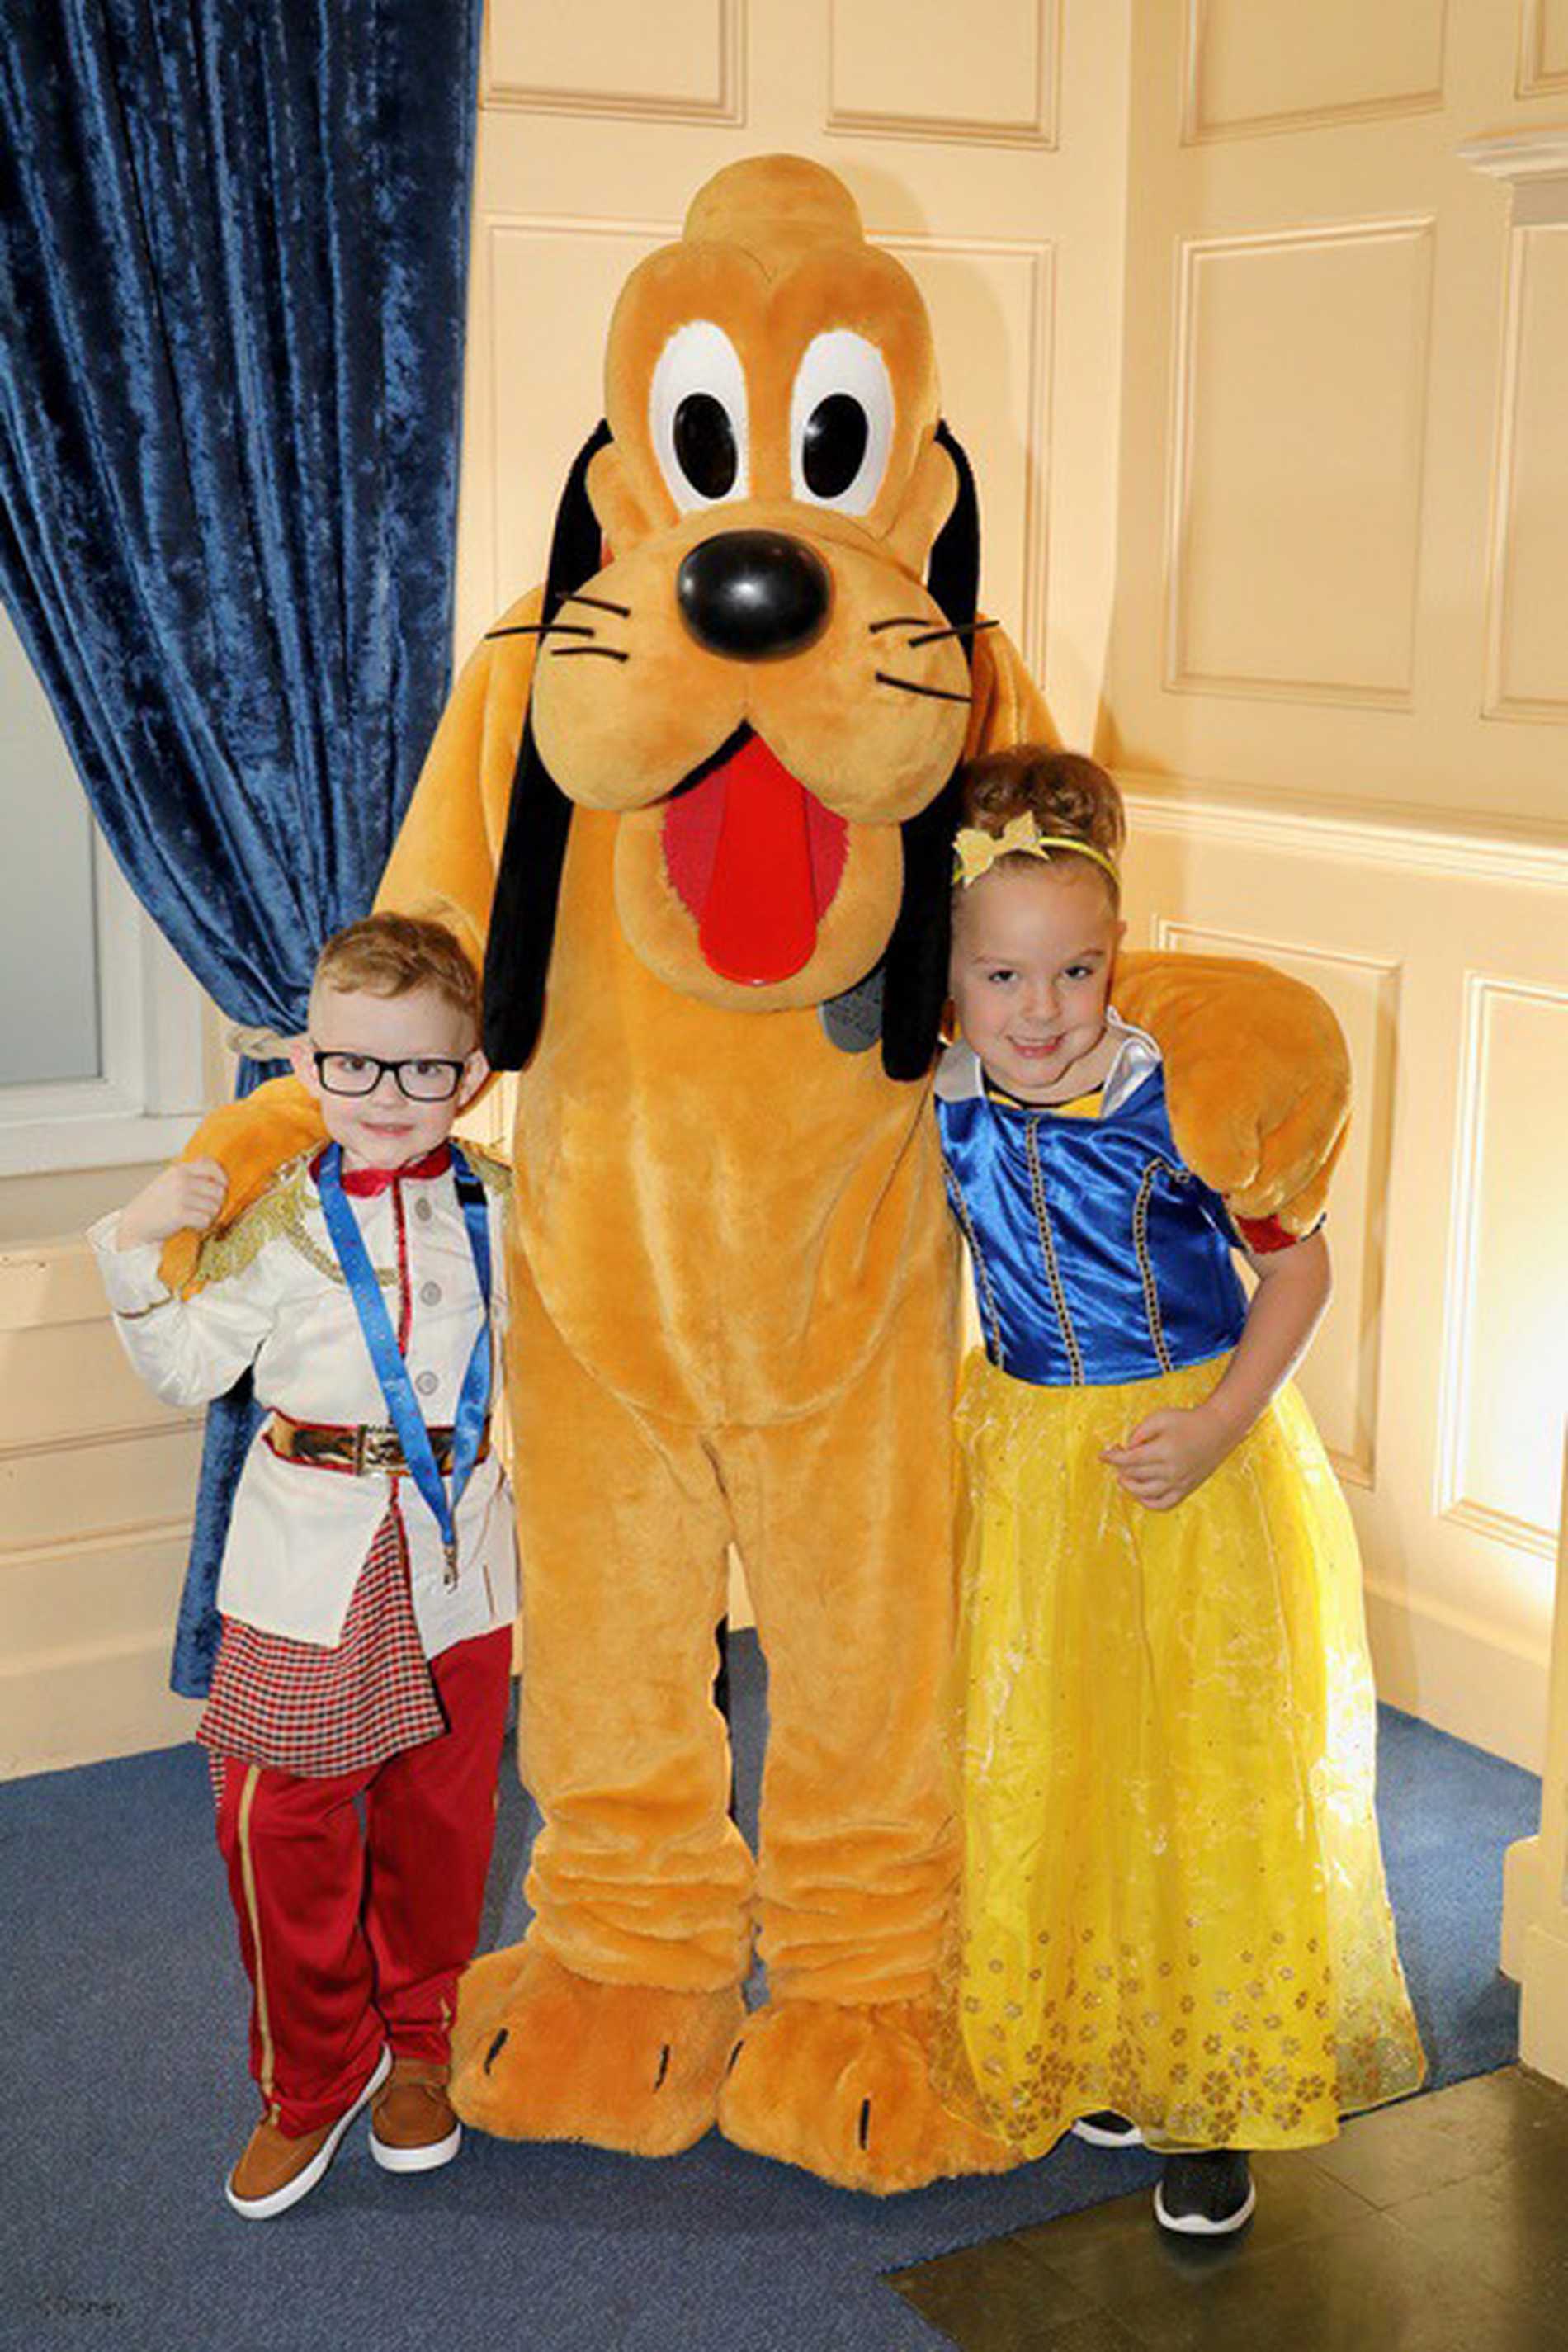 Patrick and his sister dressed in costumes, posing with Goofy.